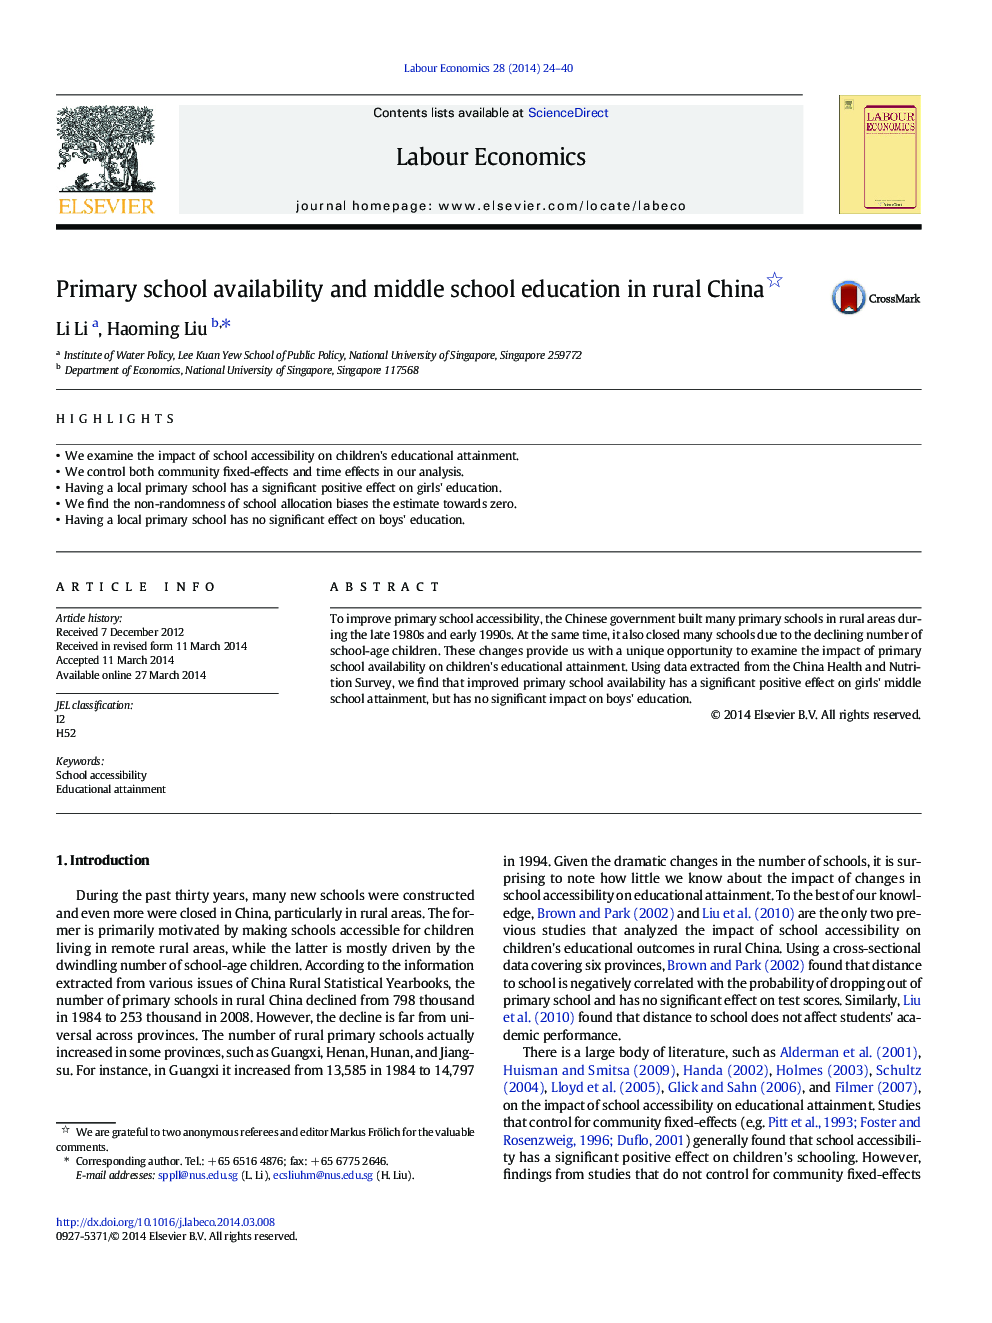 Primary school availability and middle school education in rural China 